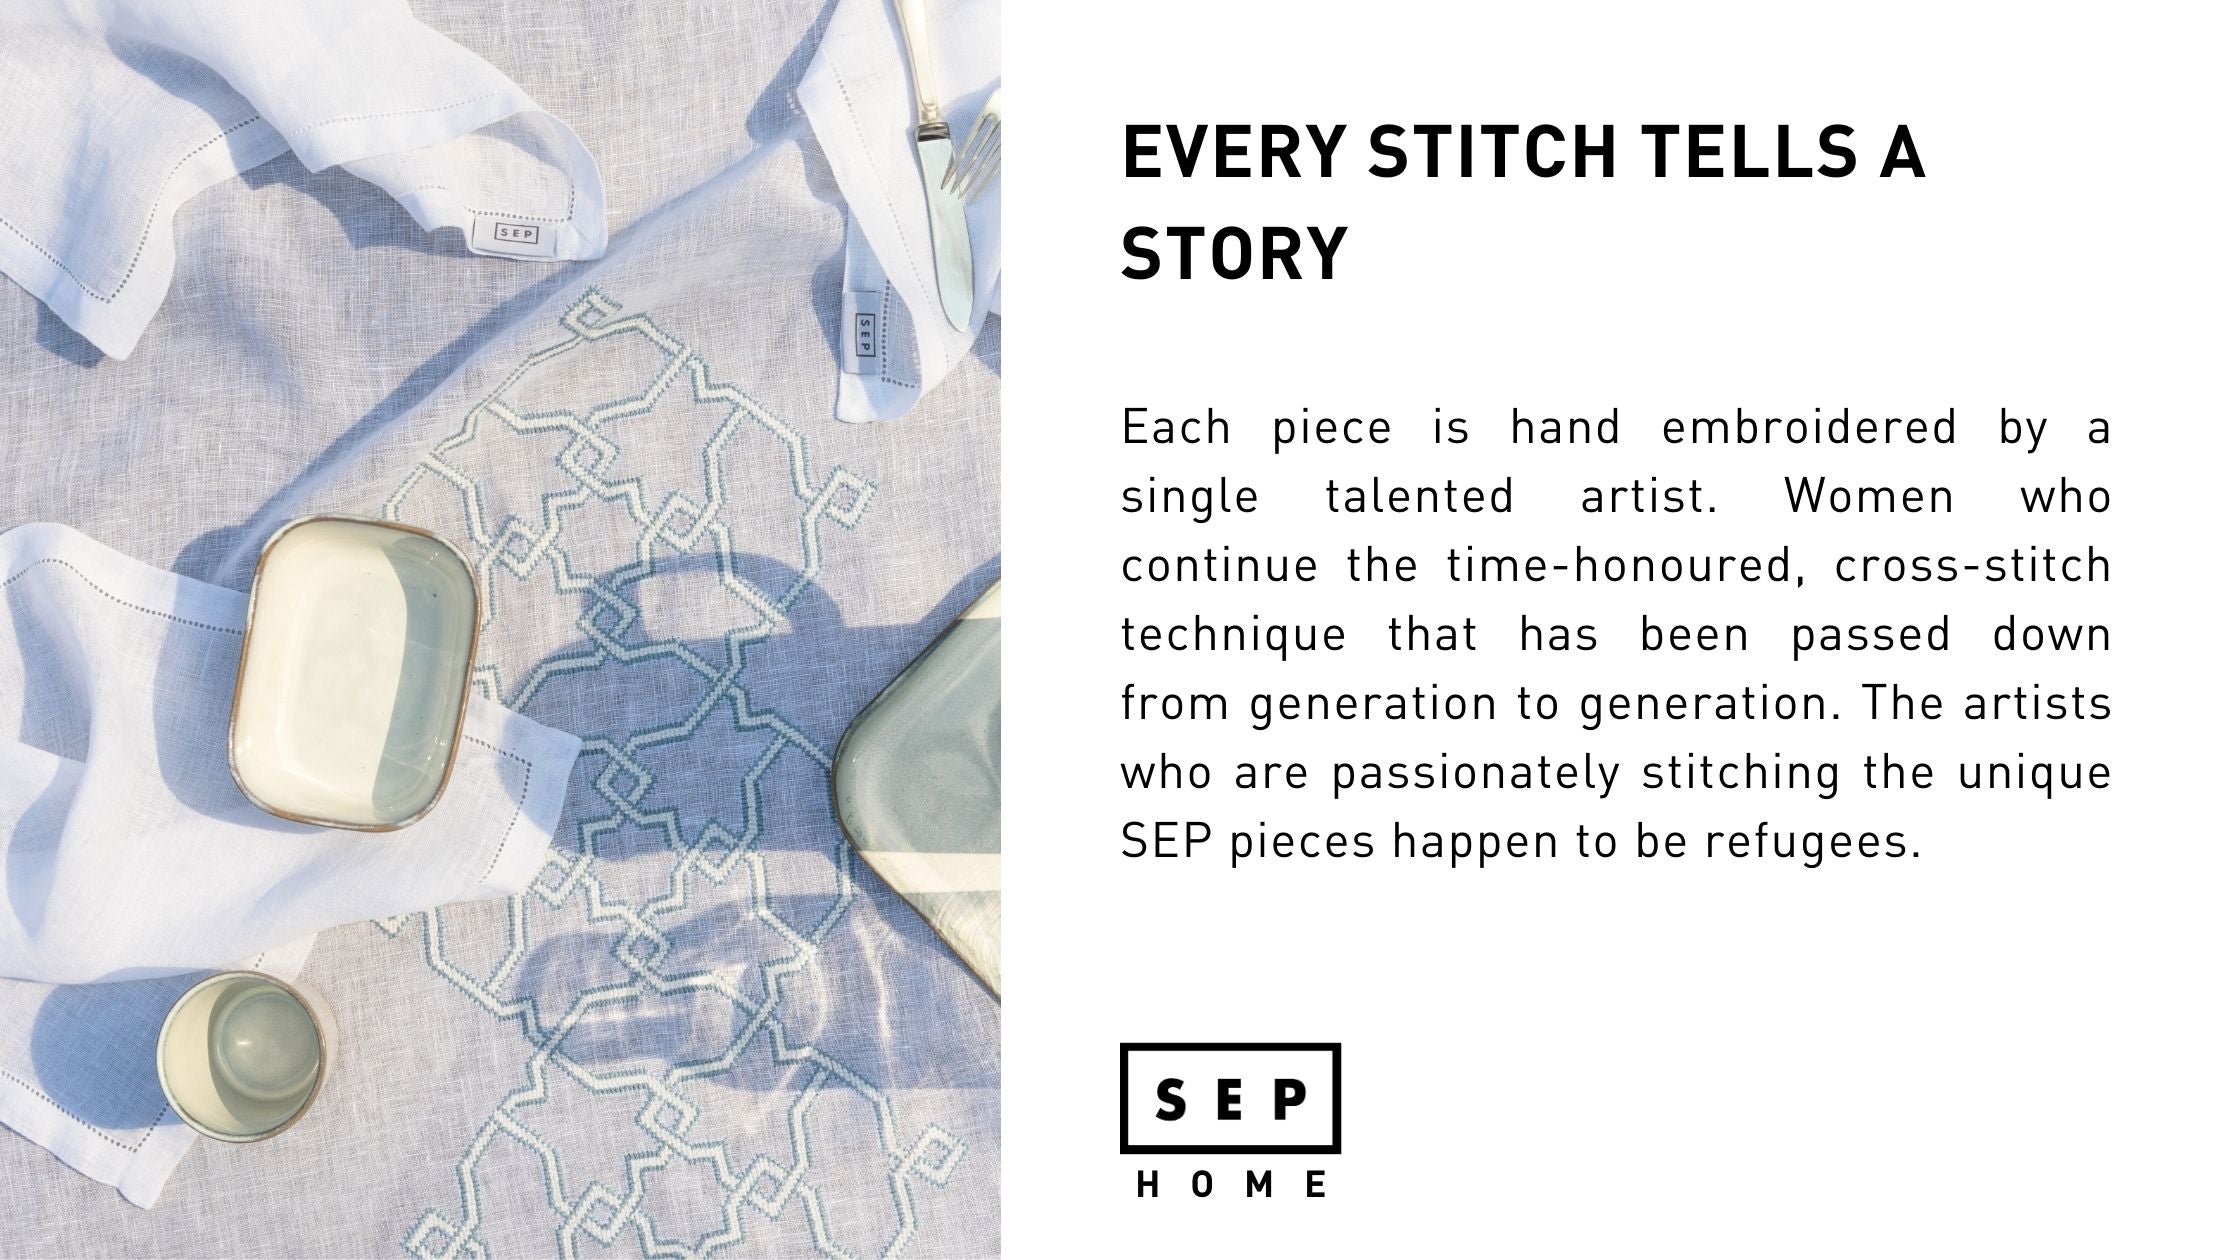 Each piece is hand embroidered by a single talented artist. Women who continue the time-honoured, cross-stitch technique that has been passed down from generation to generation. The artists who are passionately stitching the unique SEP pieces happen to be refugees.